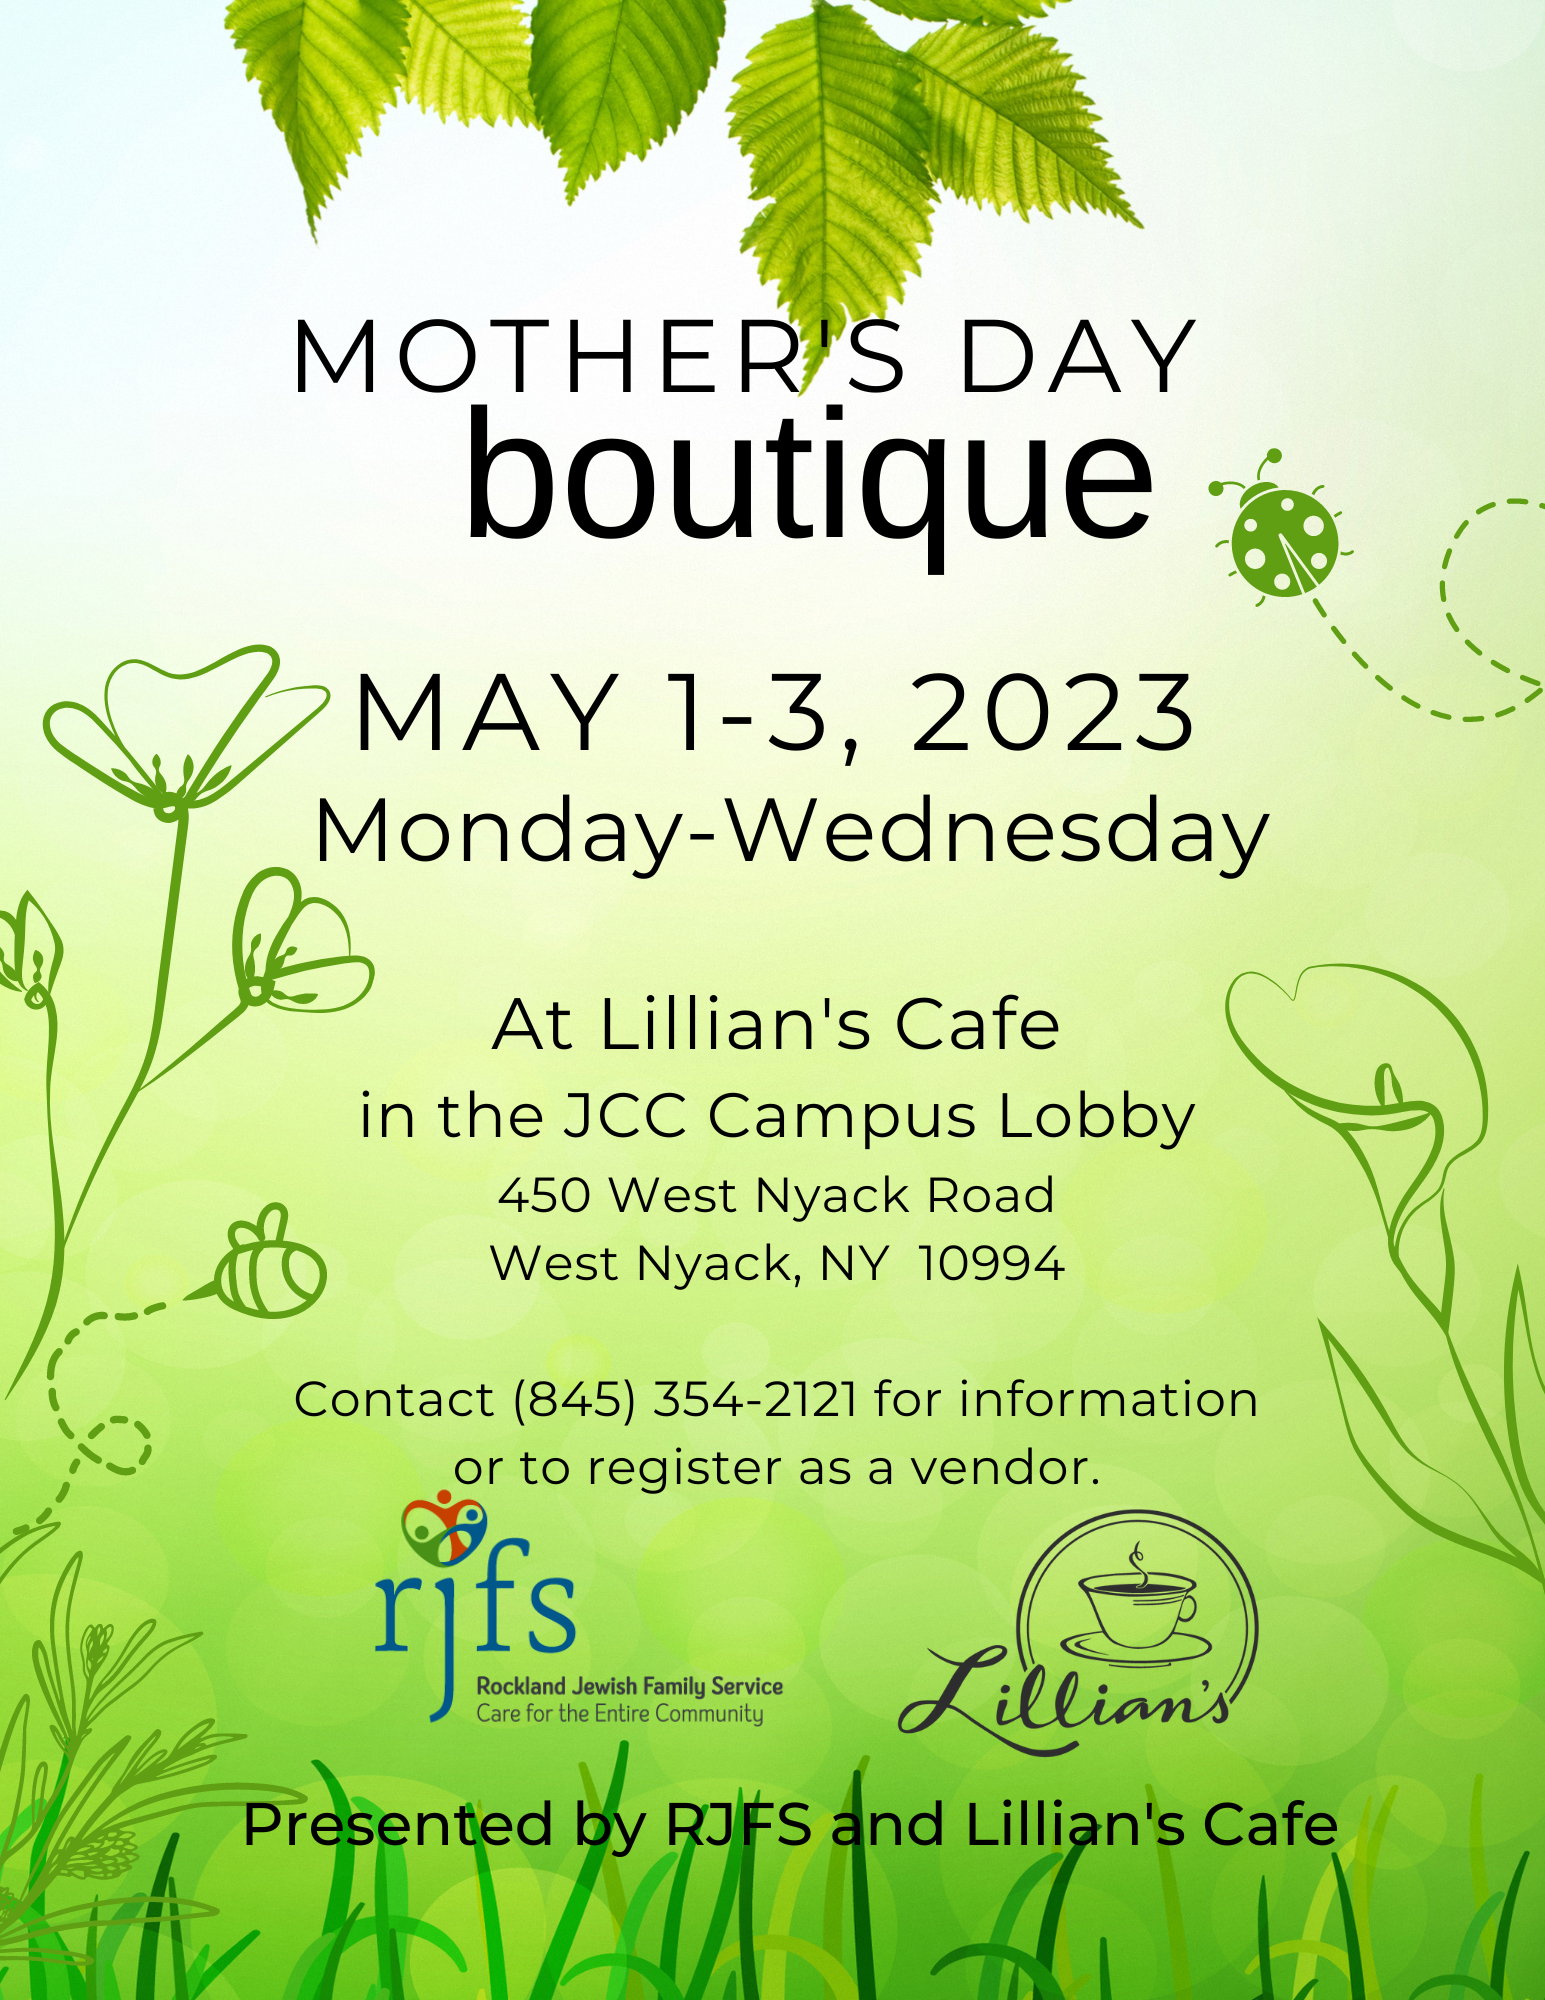 Jewelry, Ceramics, Housewares, Makeup and More -- Gifts for the mothers and caregivers in your life made by area artisans. Find us in the lobby near Lillian's Café. Monday-Wednesday, May 1-3, 10am-5pm.